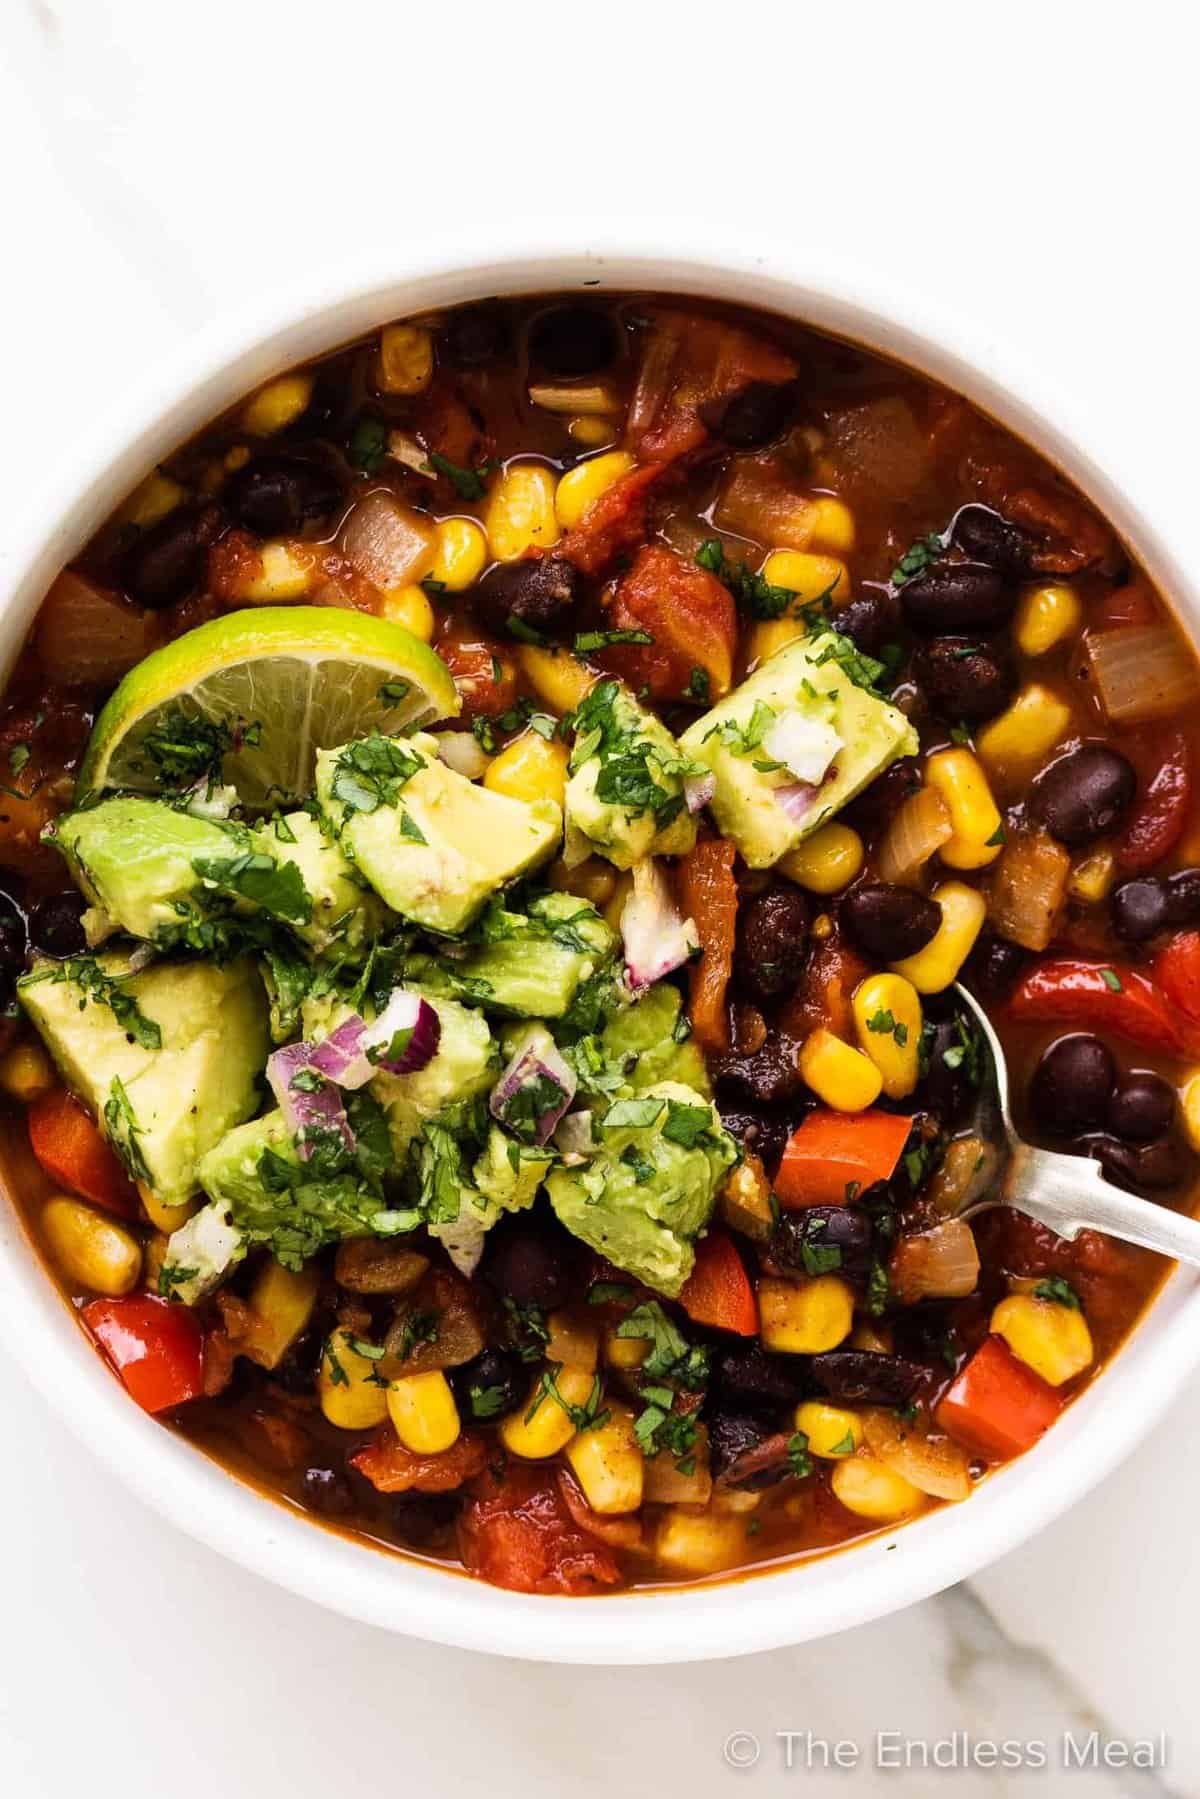  The combination of sweet roasted corn and savory black beans creates a perfect balance of taste and texture.